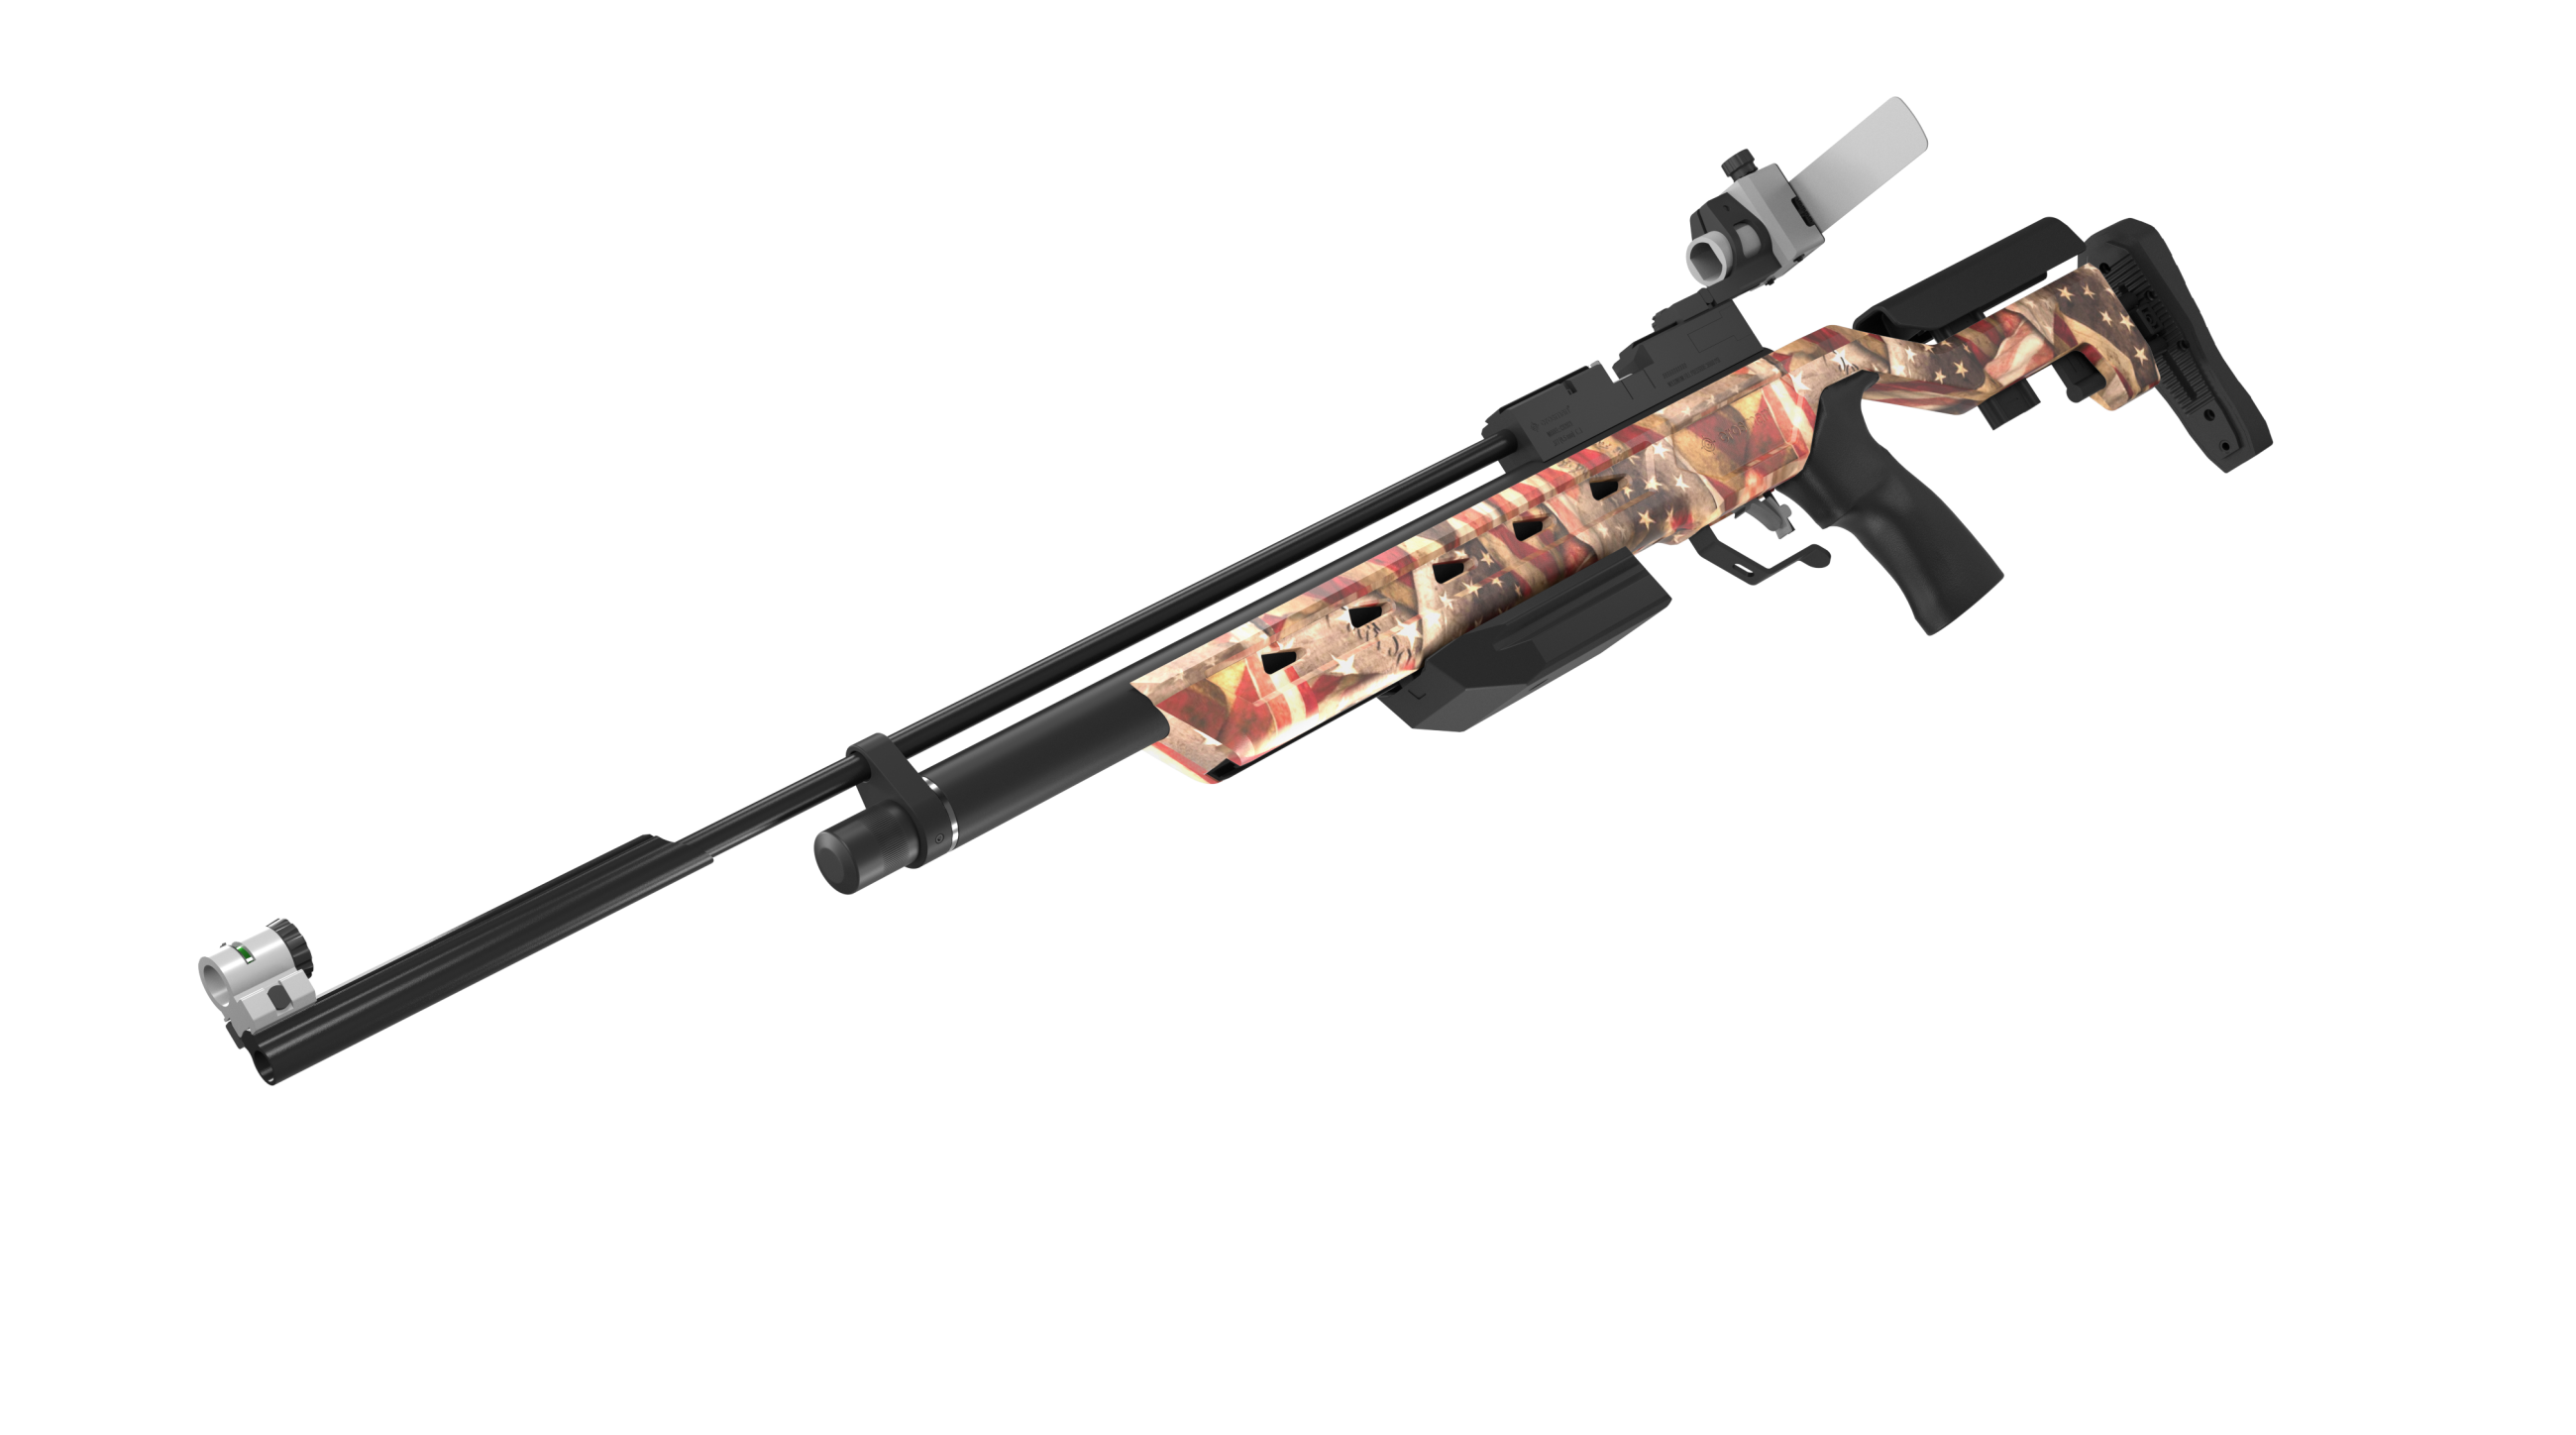 The Crosman Challenger's New Skin - American Special Flag Edition